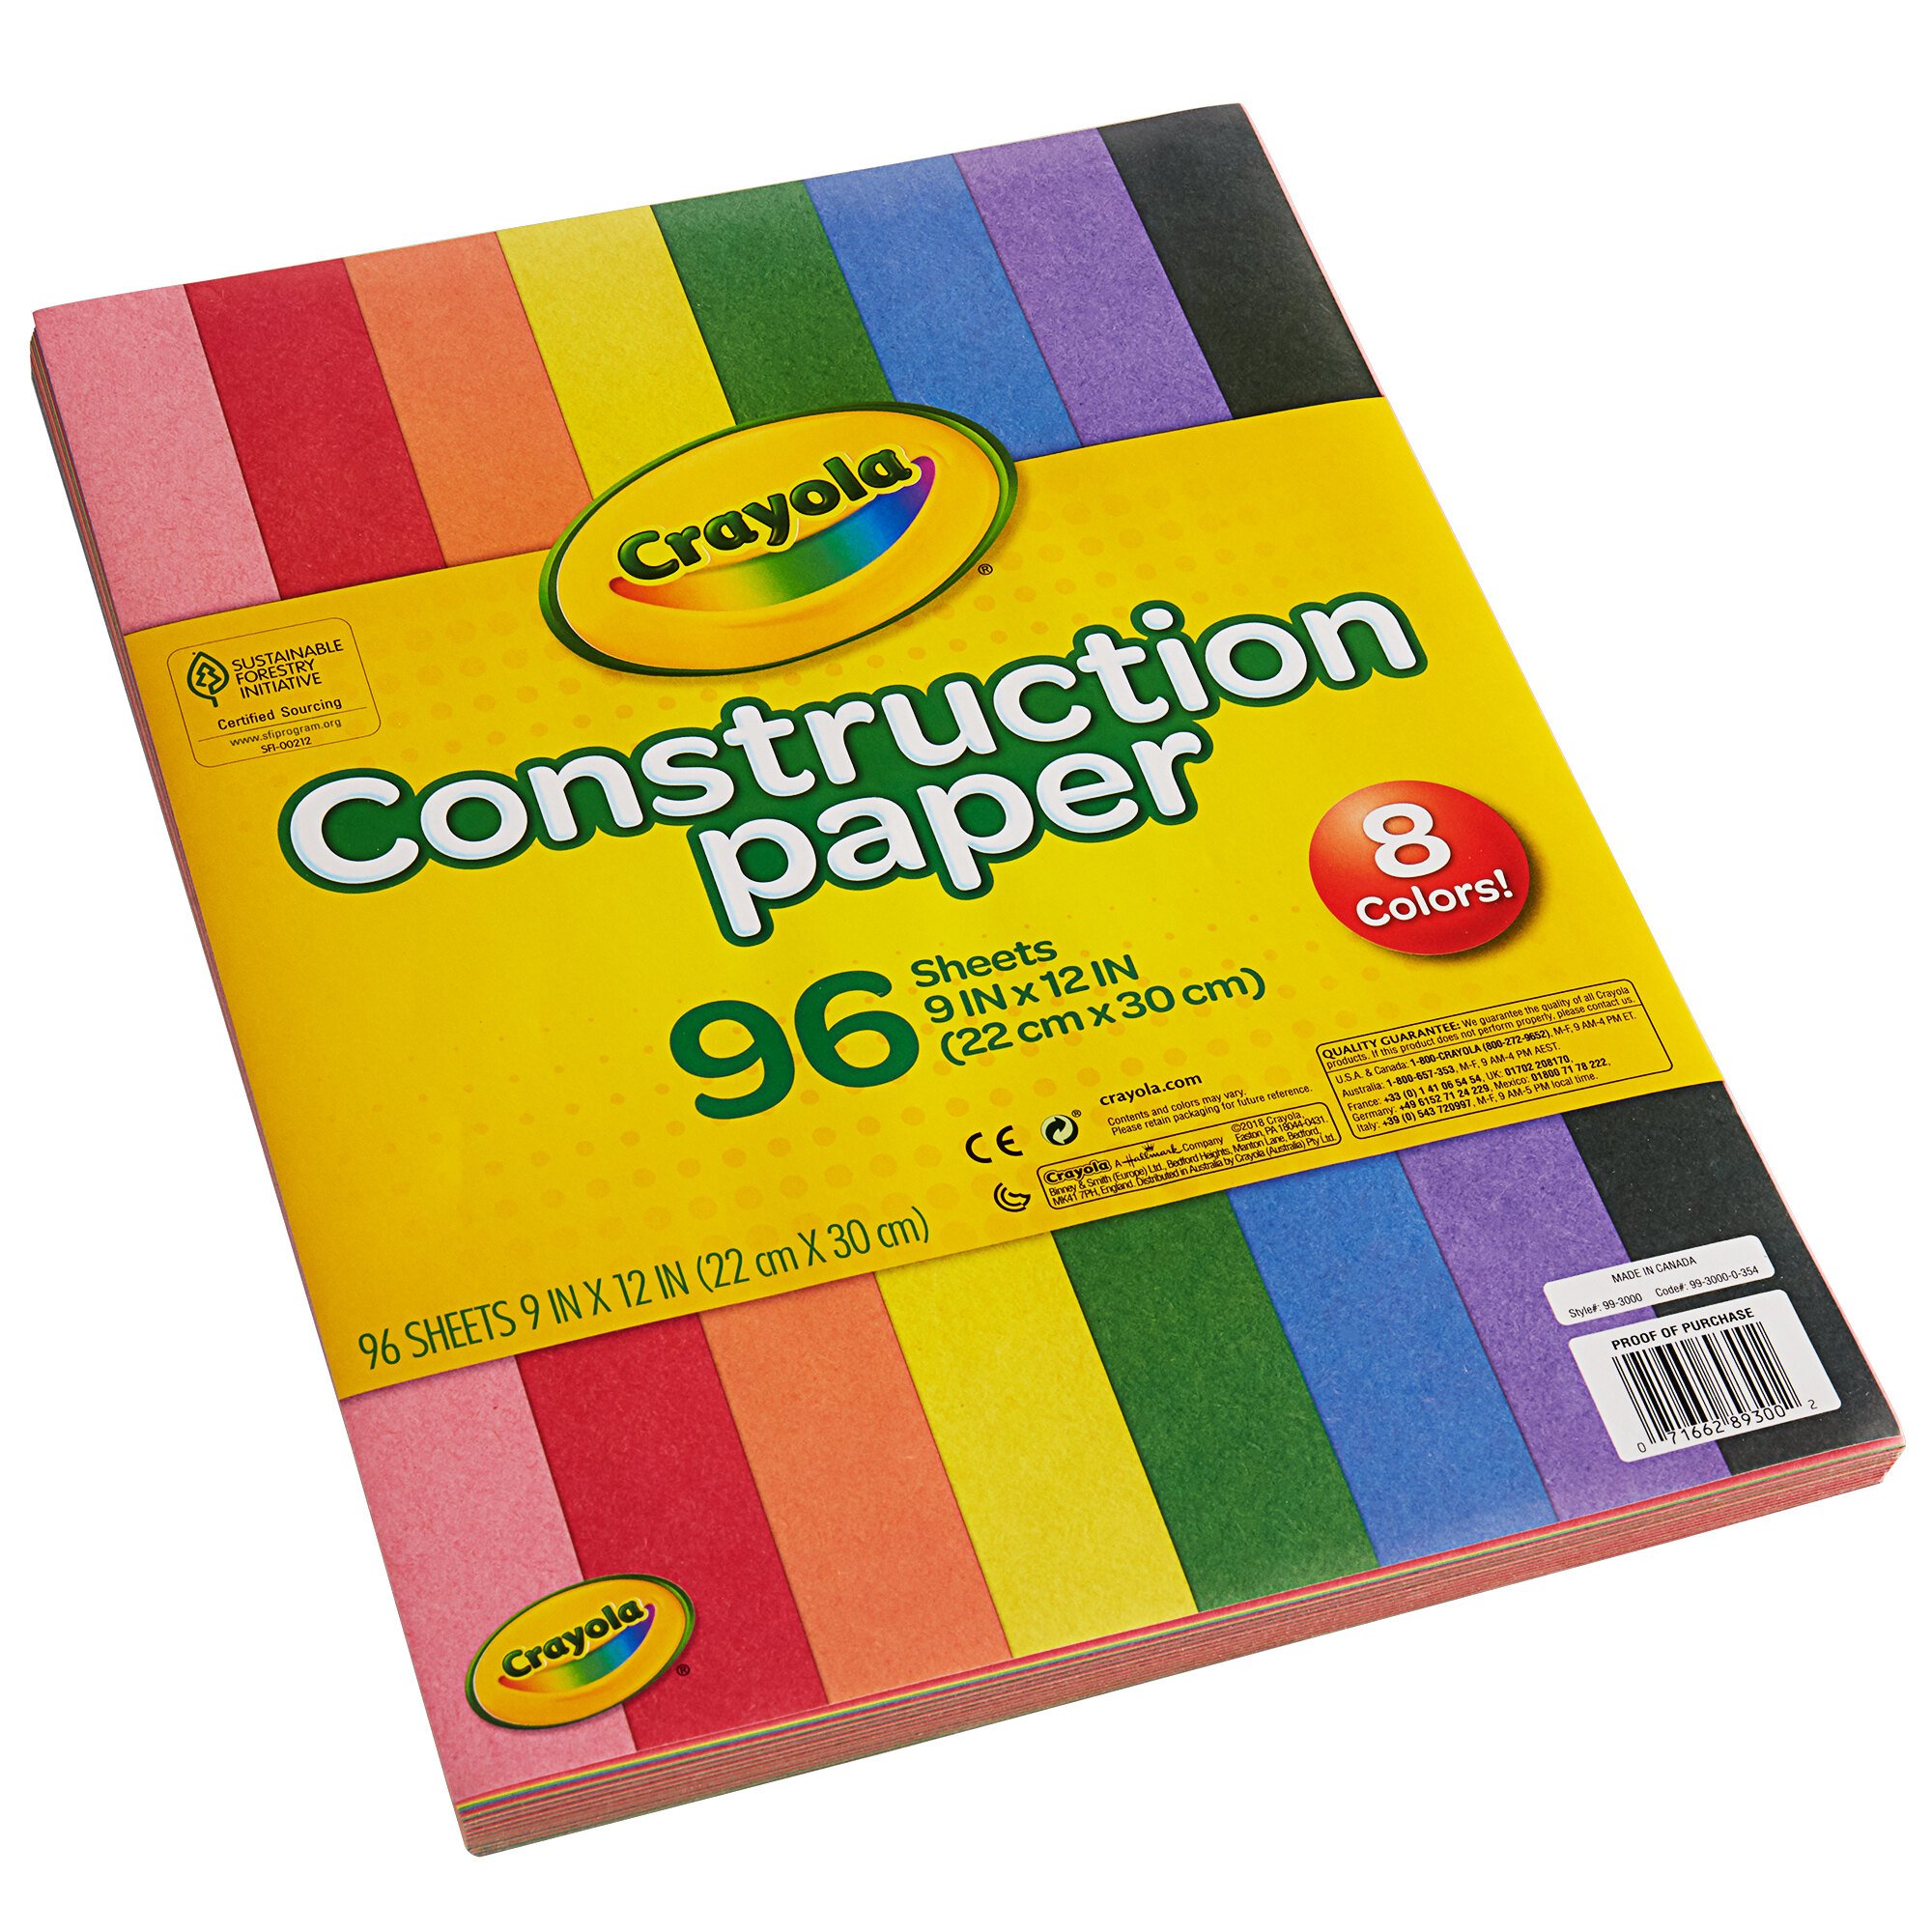 crayola-993000-9-x-12-8-assorted-color-construction-paper-96-pack